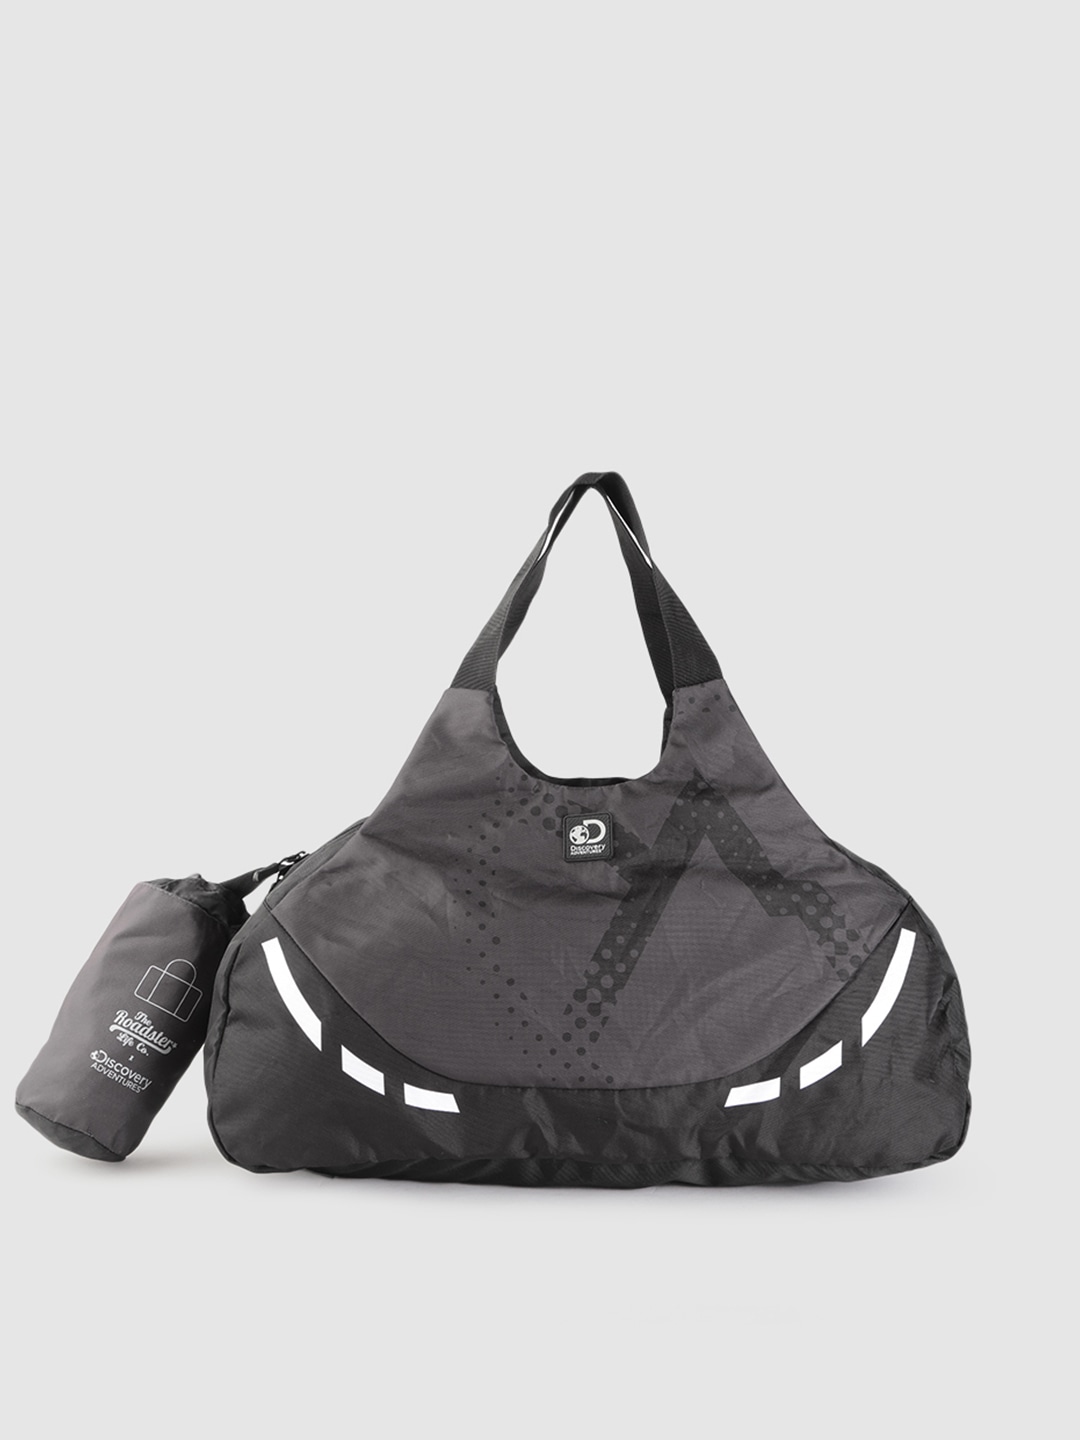 Accessories Duffel Bag | The Roadster Lifestyle Co x Discovery Adventures Unisex Black & Charcoal Grey Printed Foldable Duffel Bag - IM25357